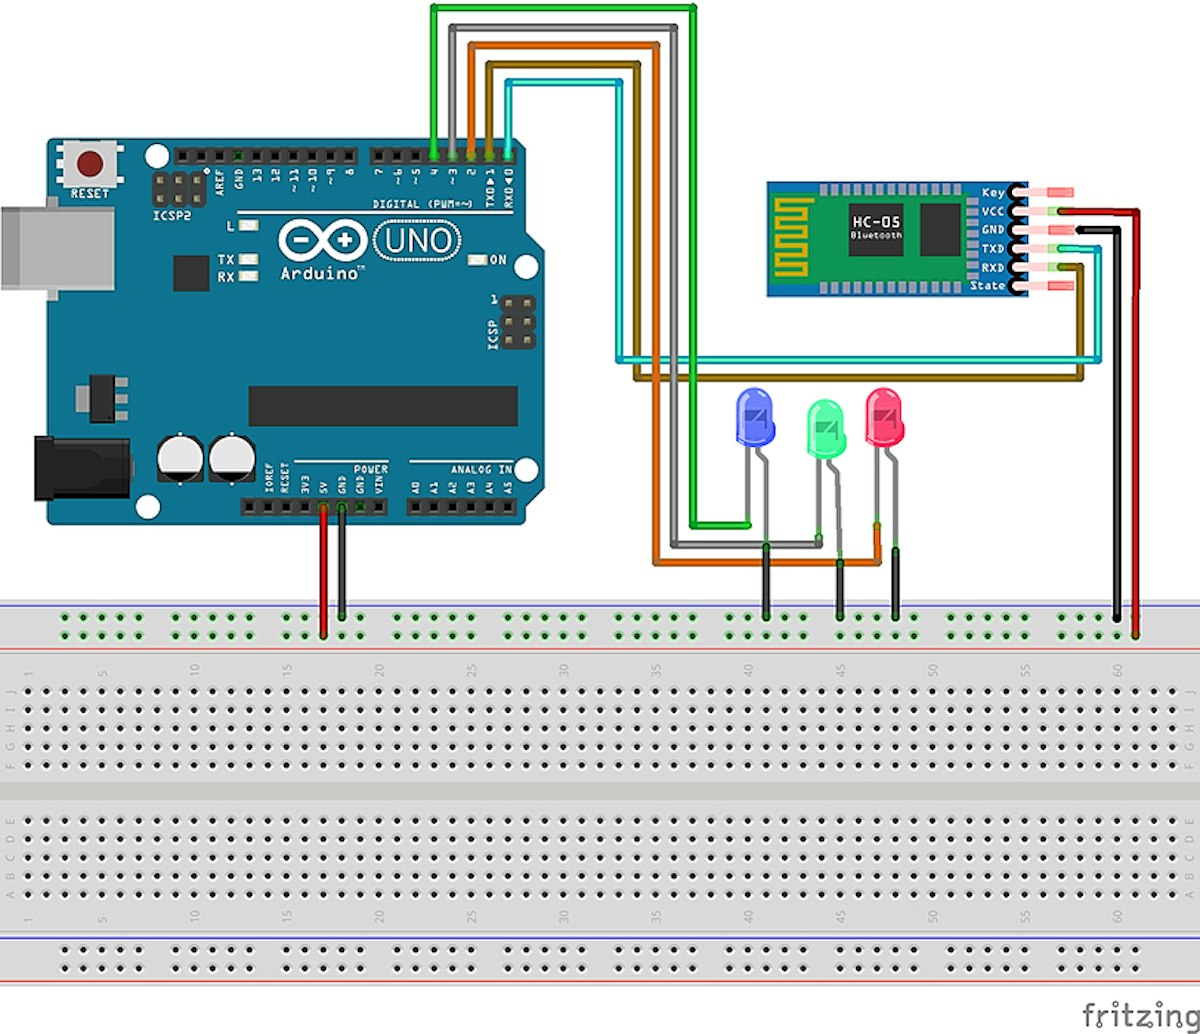 featured image - Make Arduino Voice-Controlled Appliances with HC-05 Bluetooth Module